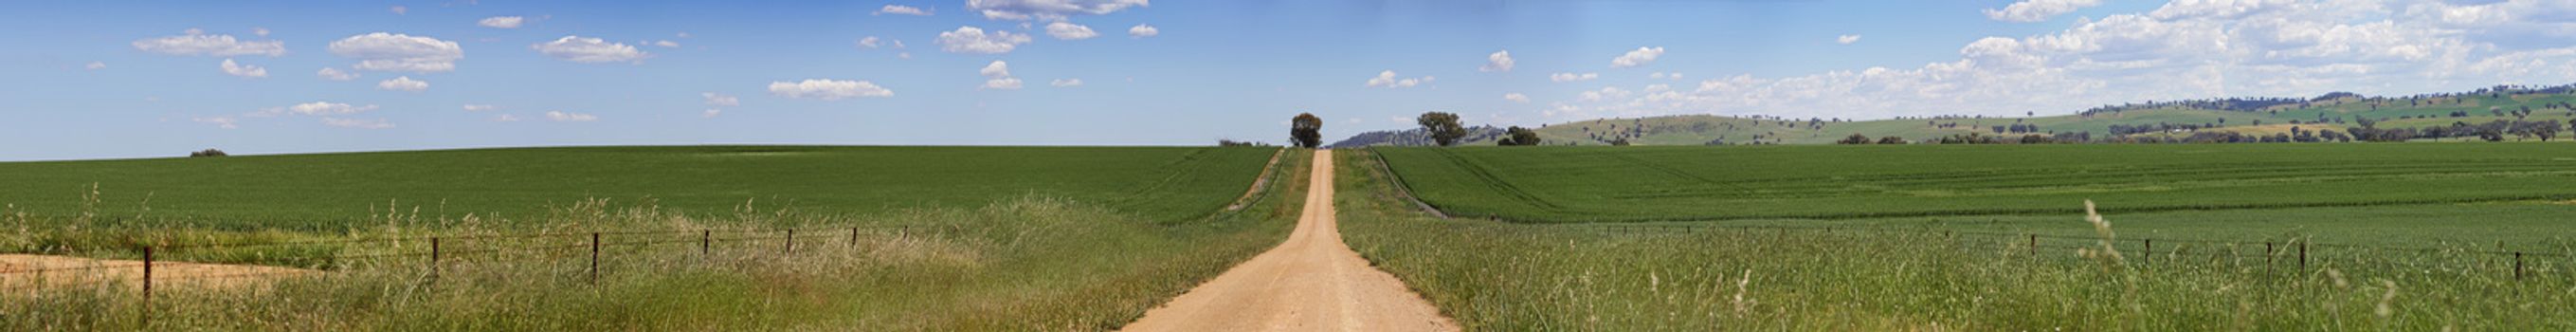 Miles of hilly dirt road carves up the fields of farmland in country NSW Australia